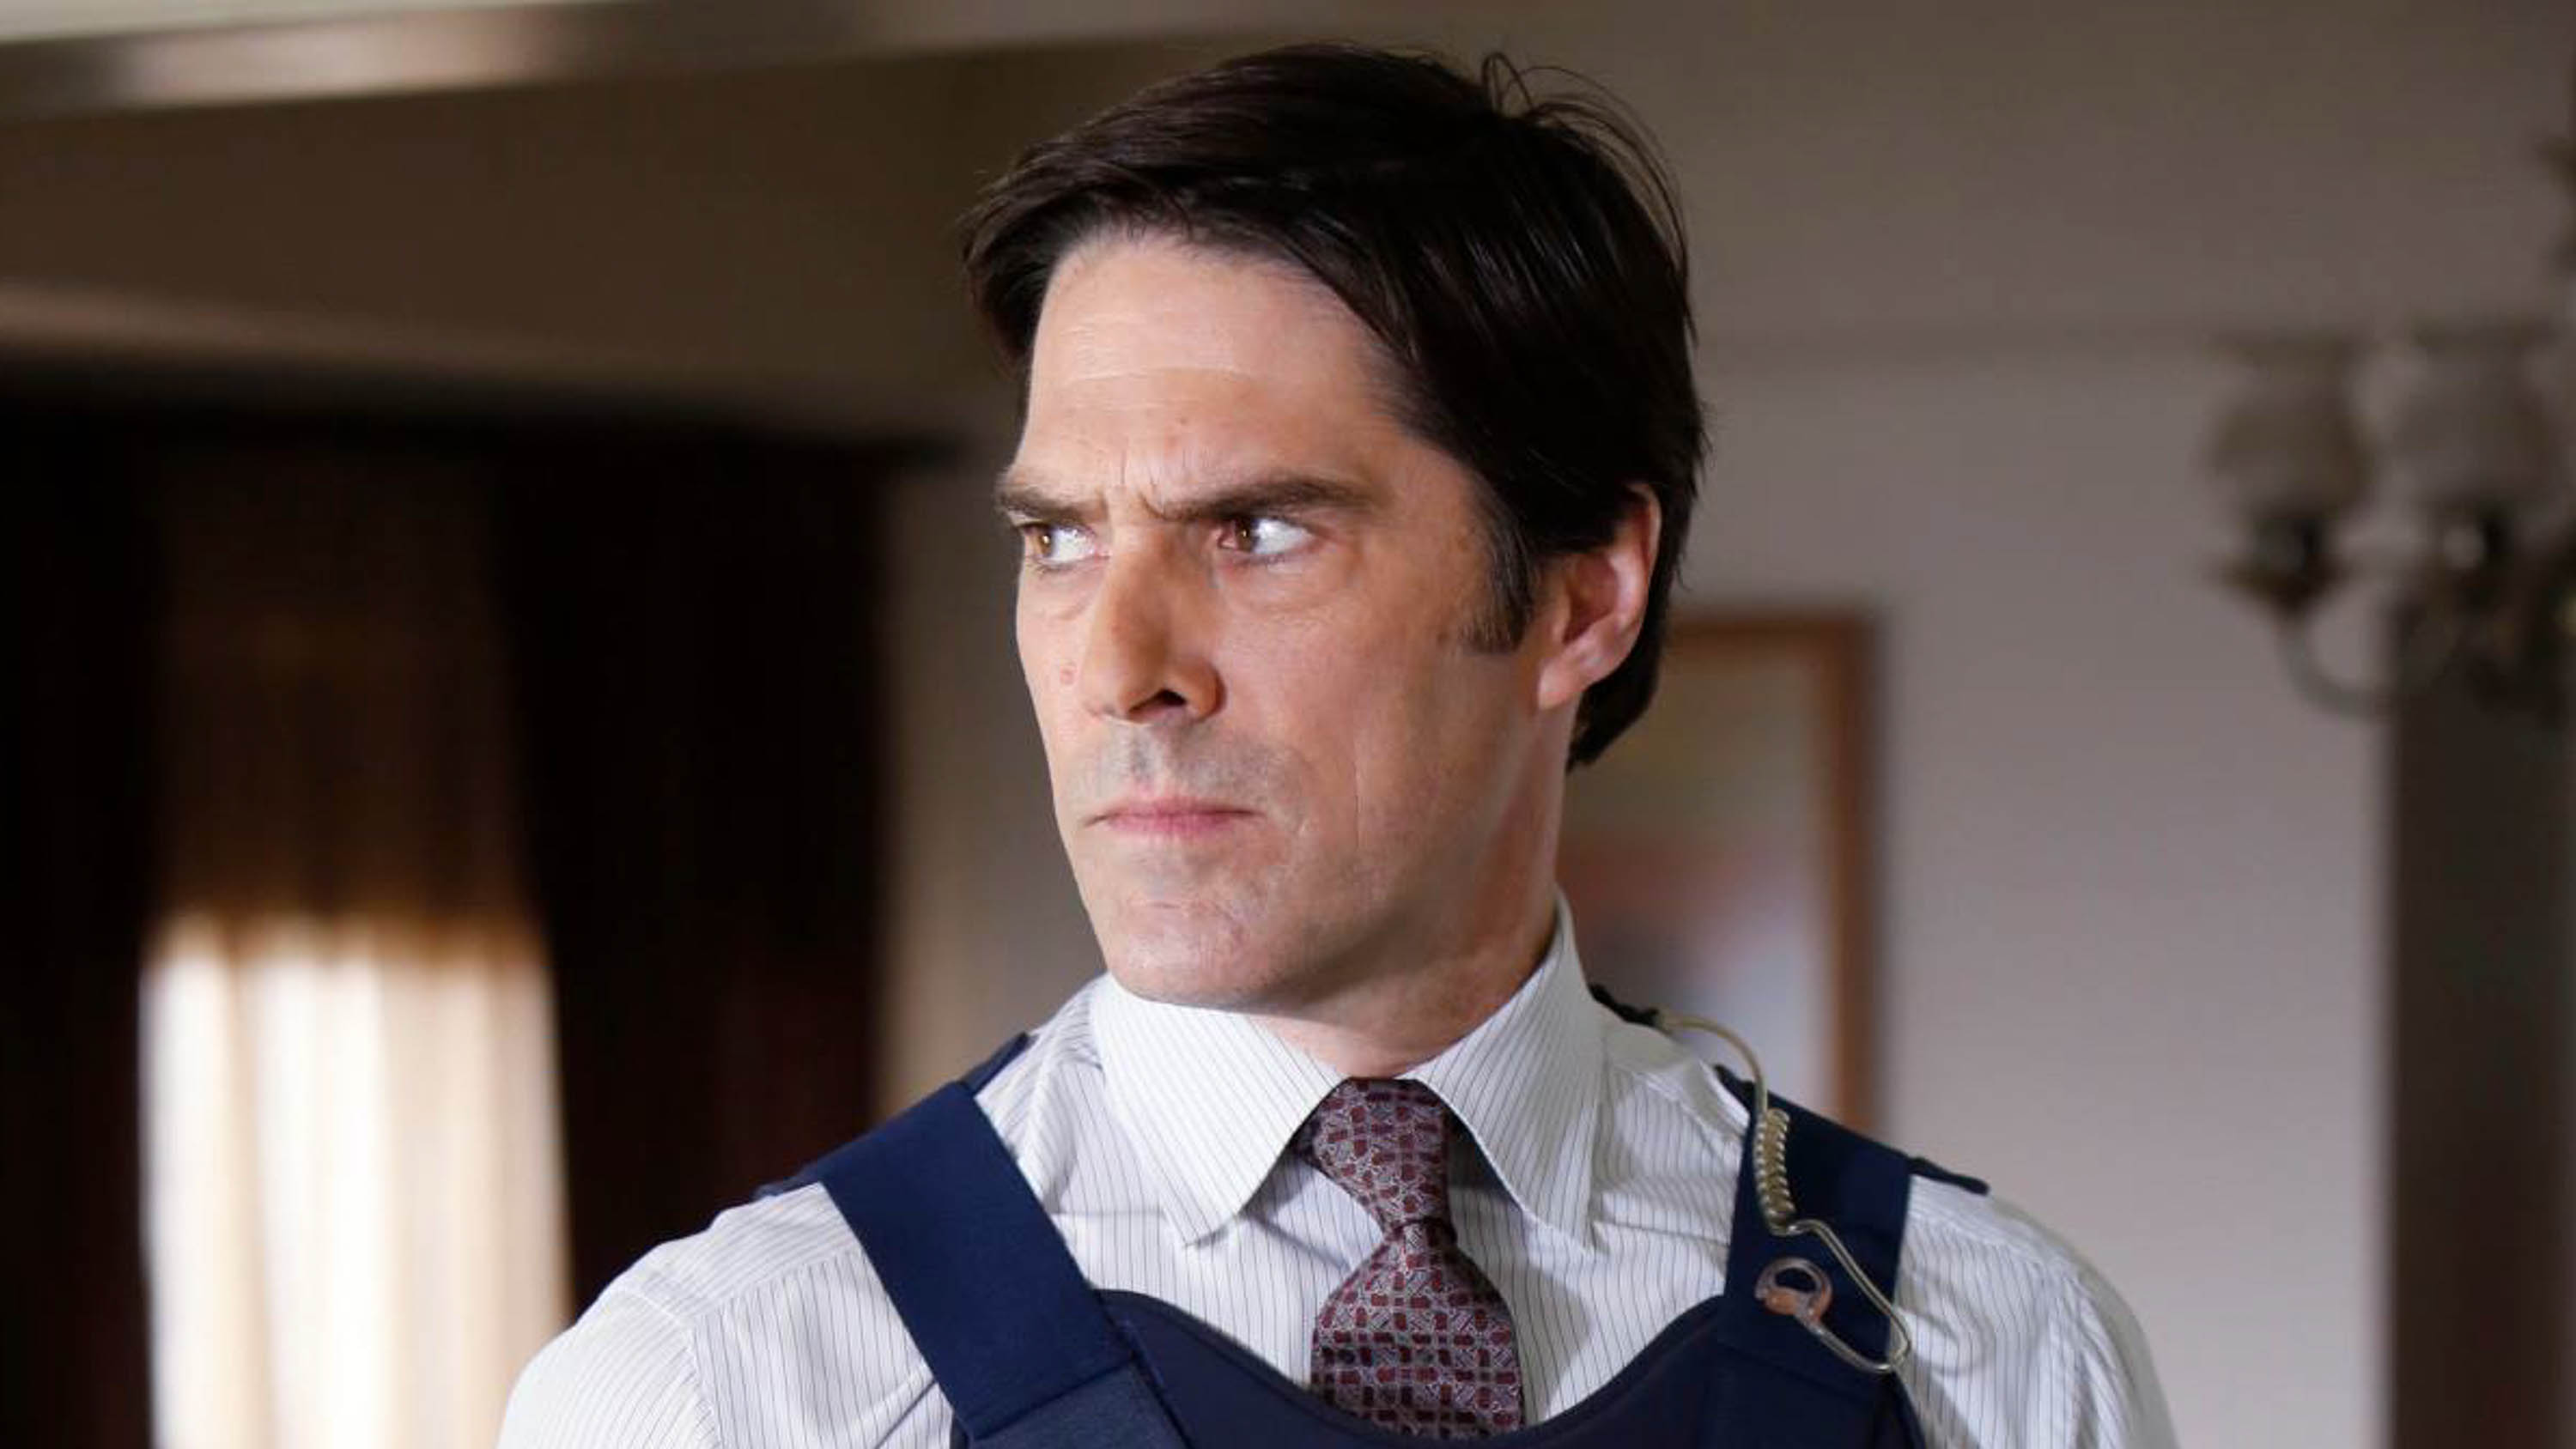 The actor, who plays Aaron Hotchner on 'Criminal Minds,' is suspe...